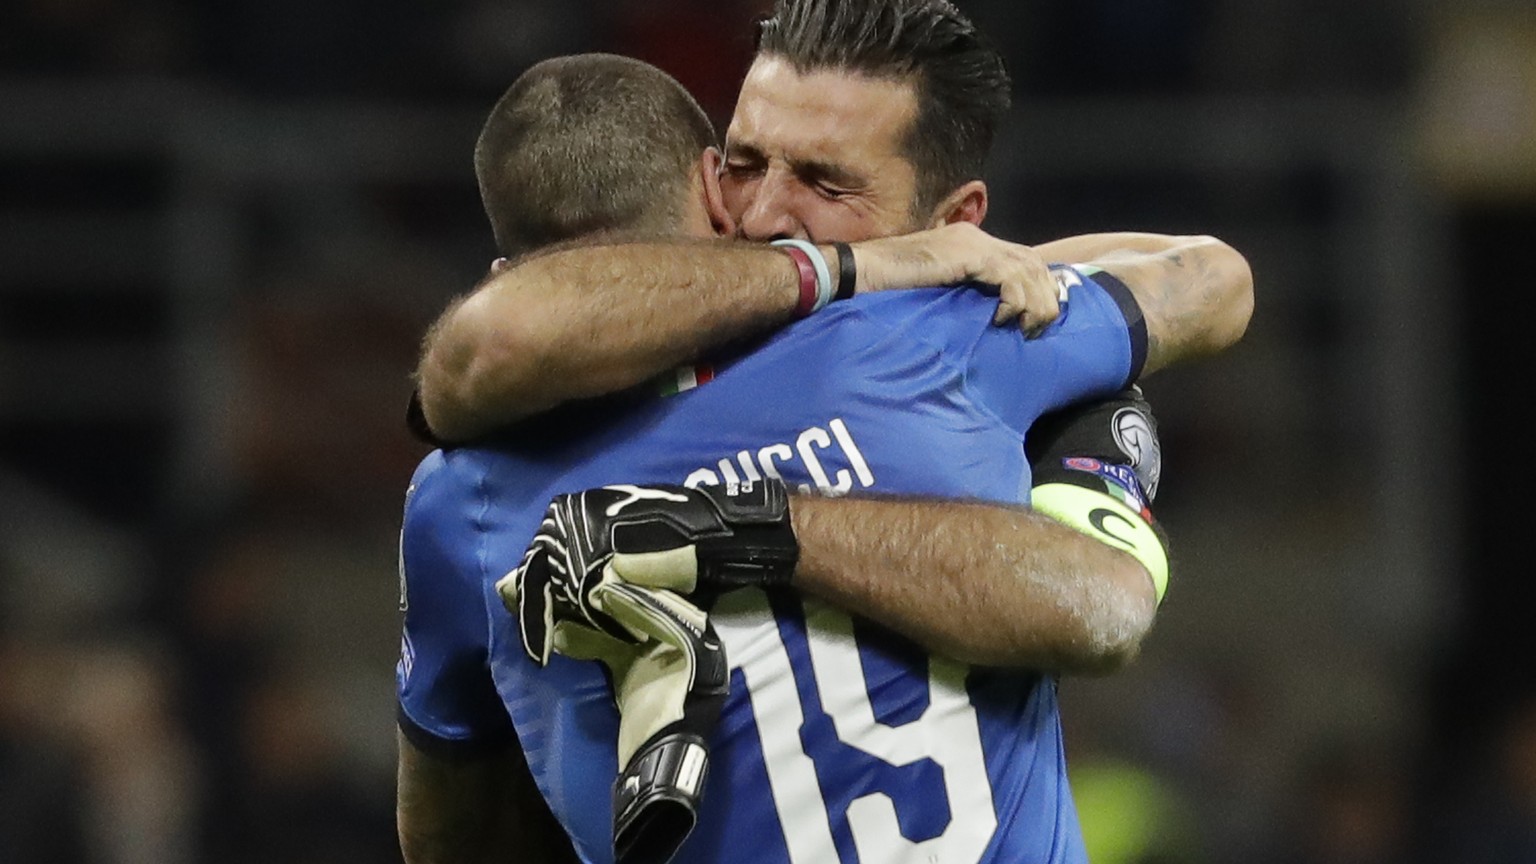 Italy goalkeeper Gianluigi Buffon is hugged by teammate Leonardo Bonucci after their team was eliminated in the World Cup qualifying play-off second leg soccer match between Italy and Sweden, at the M ...